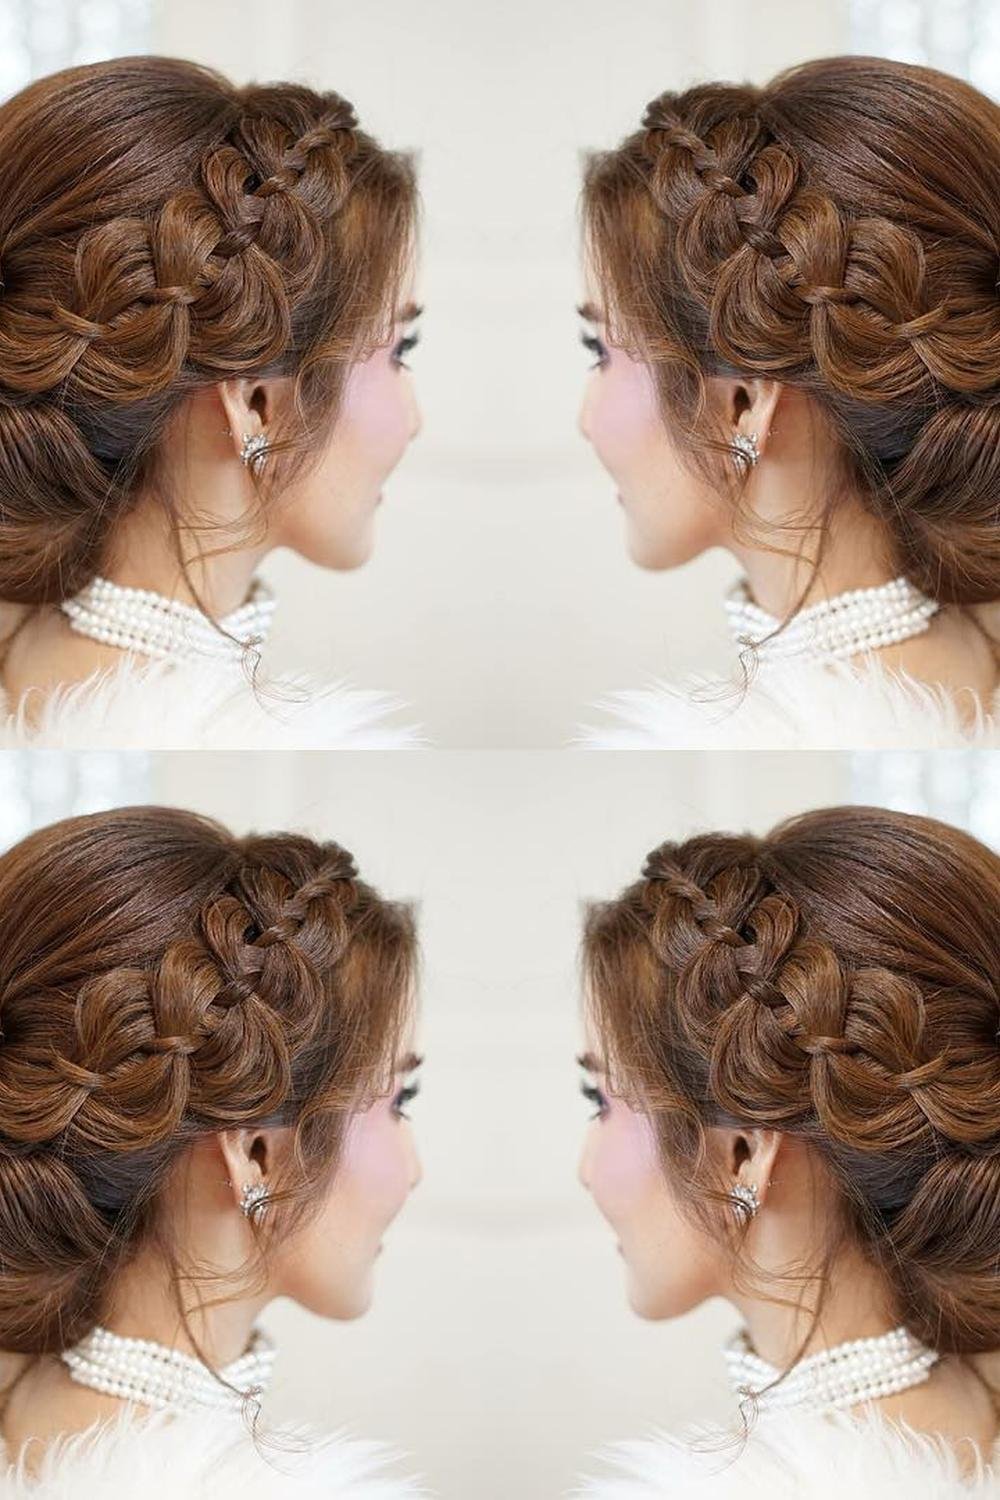 31 - Picture of Braided Hairstyles